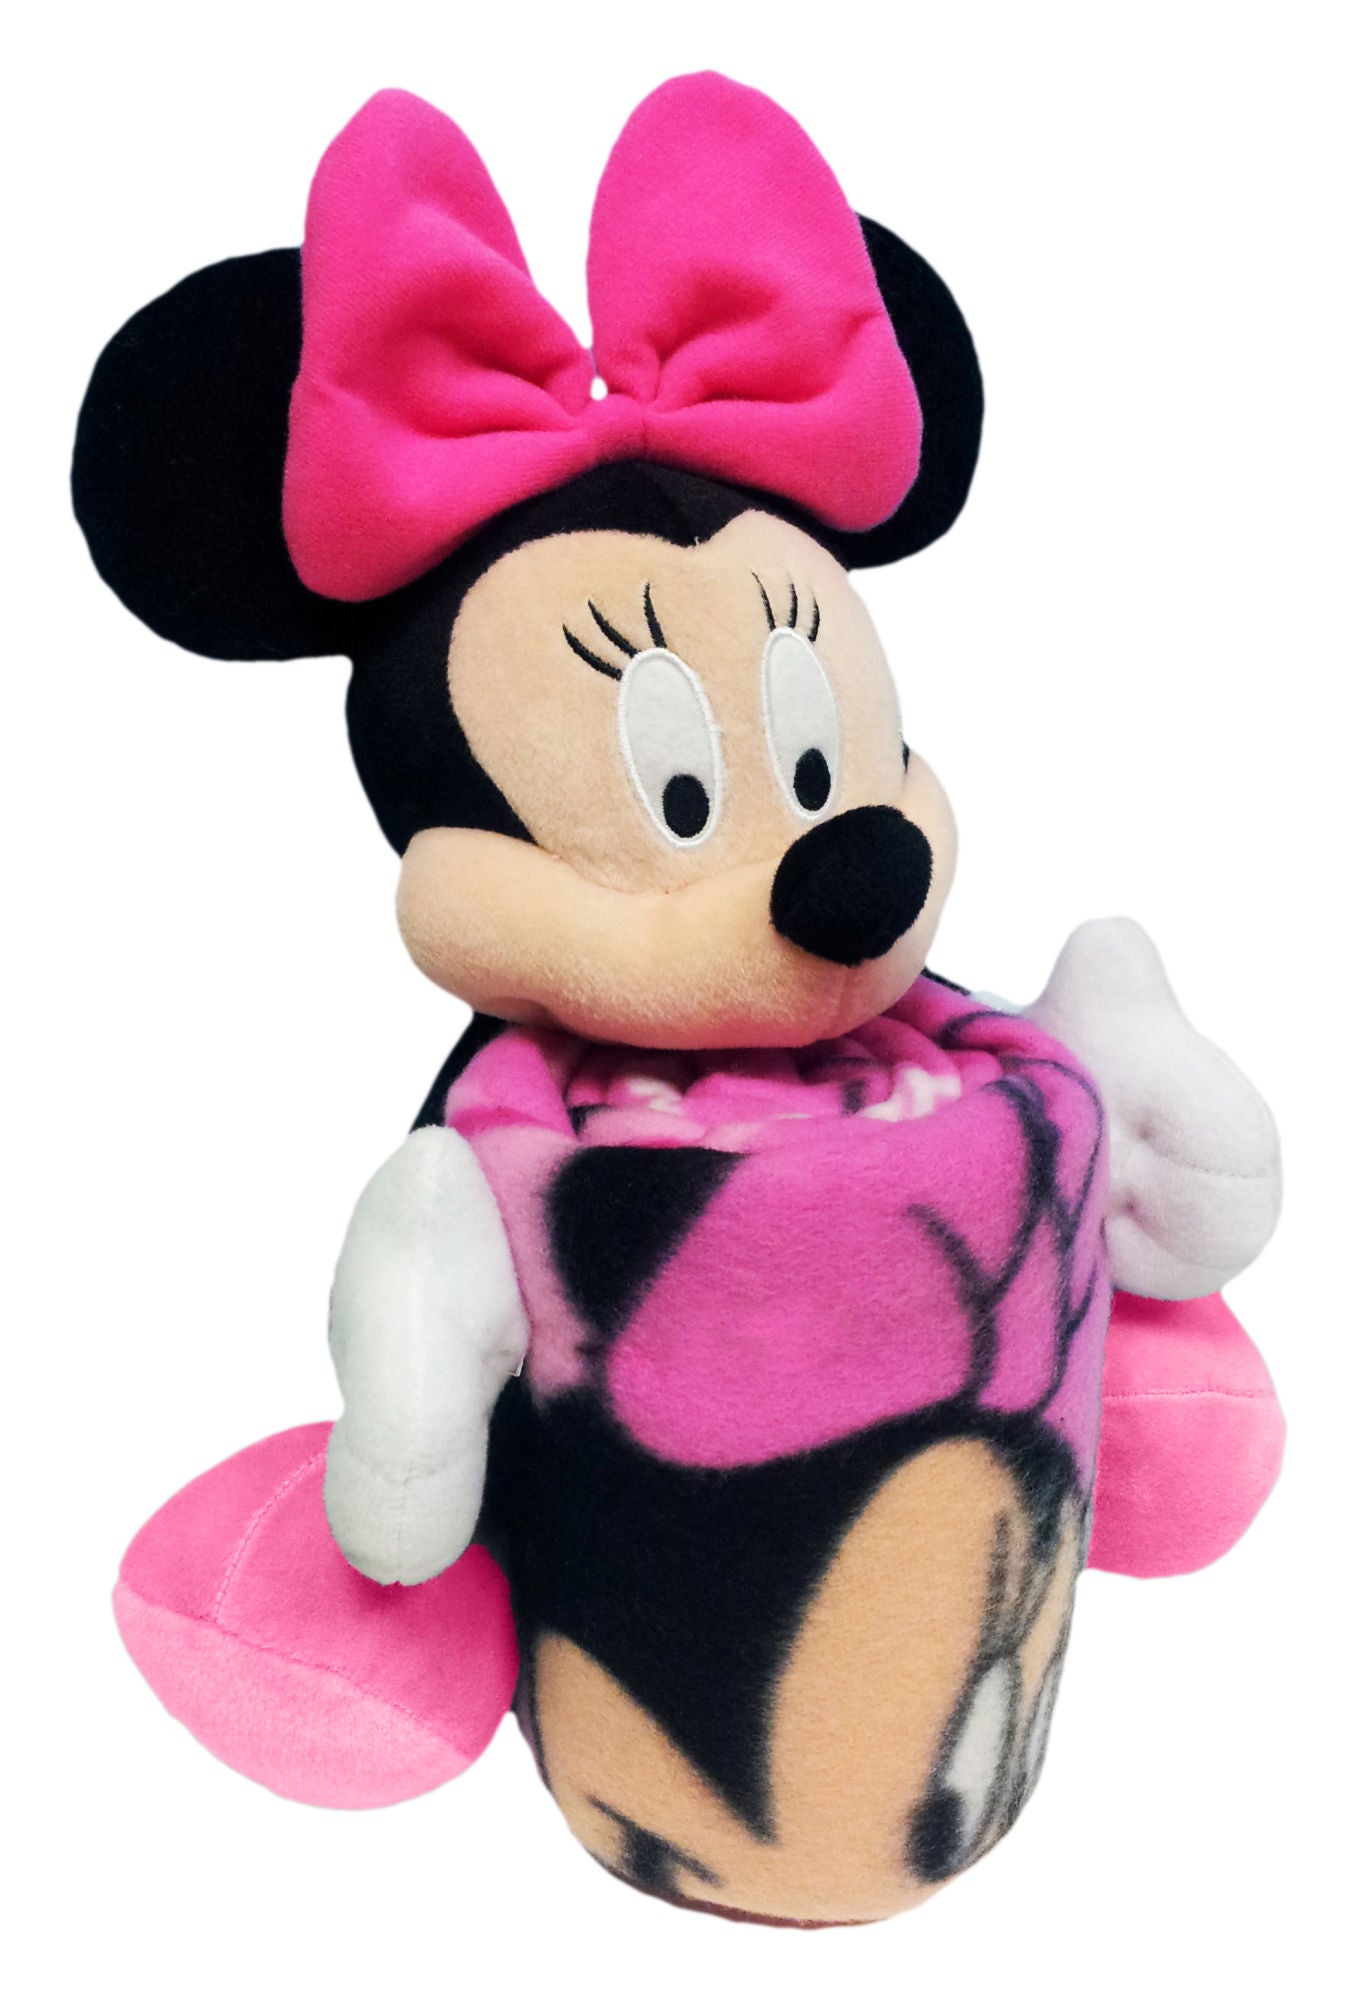 NFL - COB 312 Raiders OFFICIAL NFL & Disney's Minnie Mouse Character Hugger Pillow & Silk Touch Throw Set;  40" x 50"